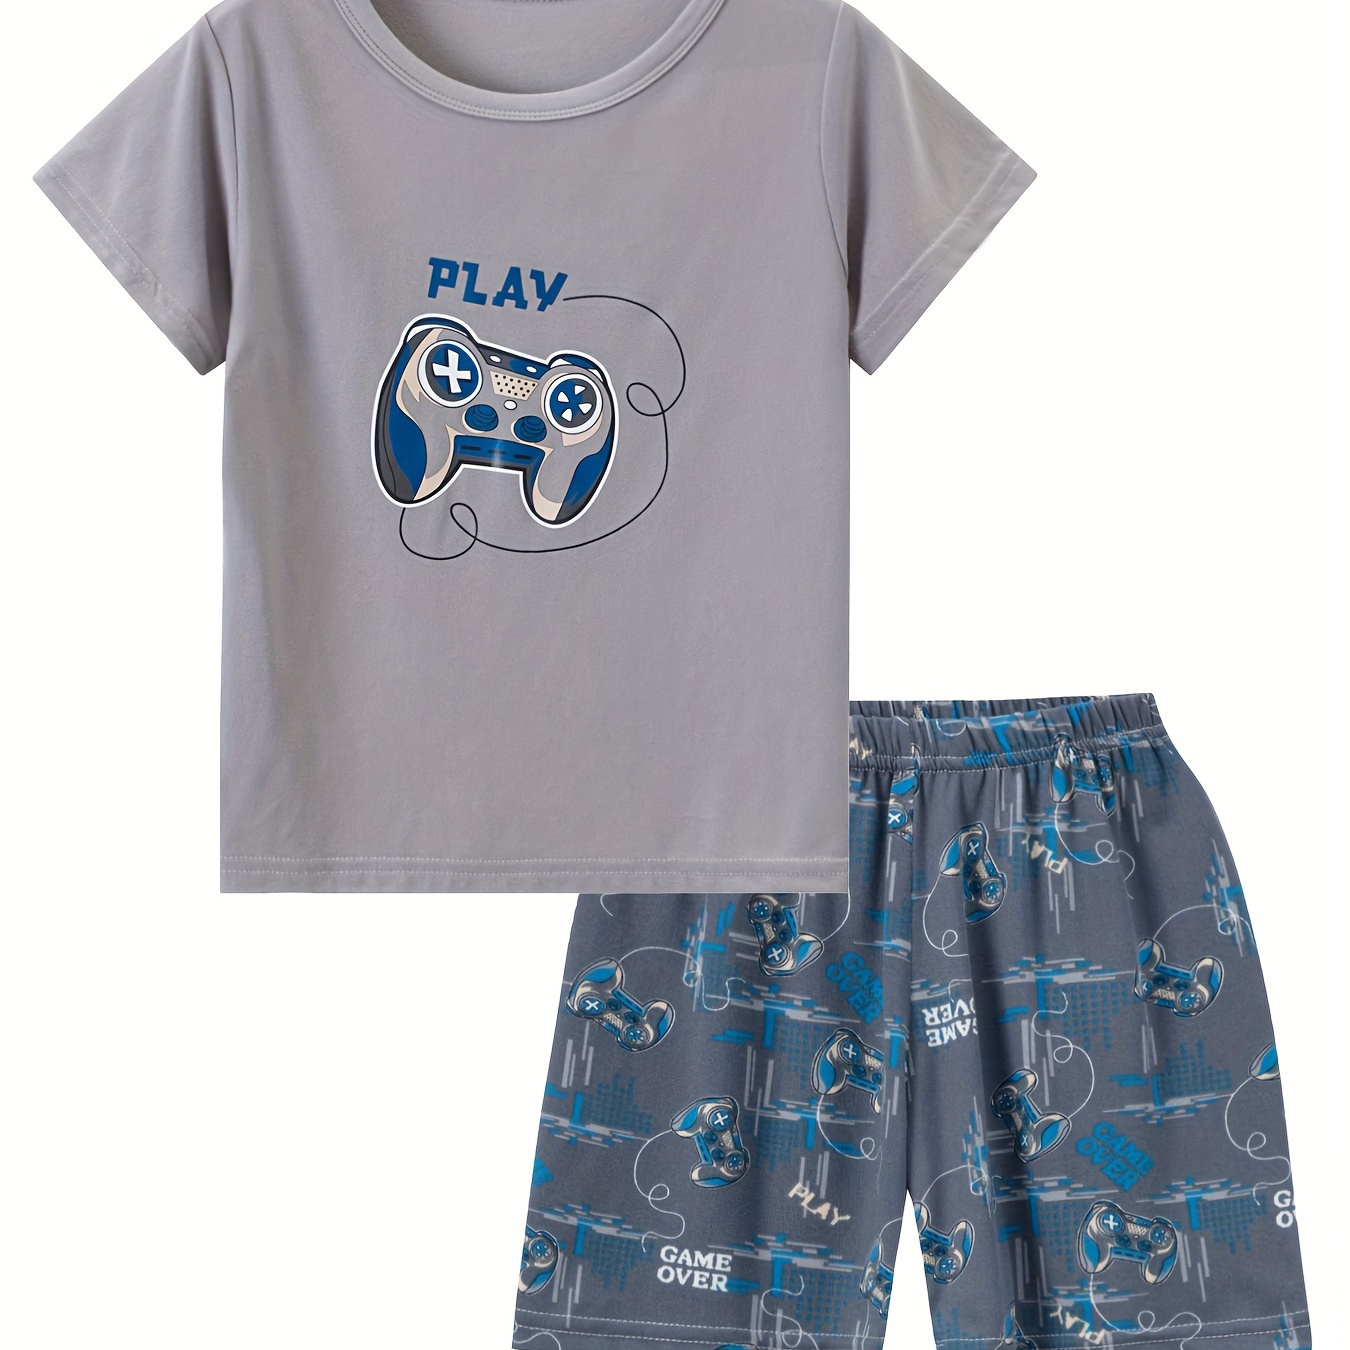 

2 Pcs Boys Cute Pajama Sets, "paly Game" Game Console Pattern Print Short Sleeve T-shirts & Shorts, Comfortable & Cute Style Pajamas For Boys Cozy Loungewear